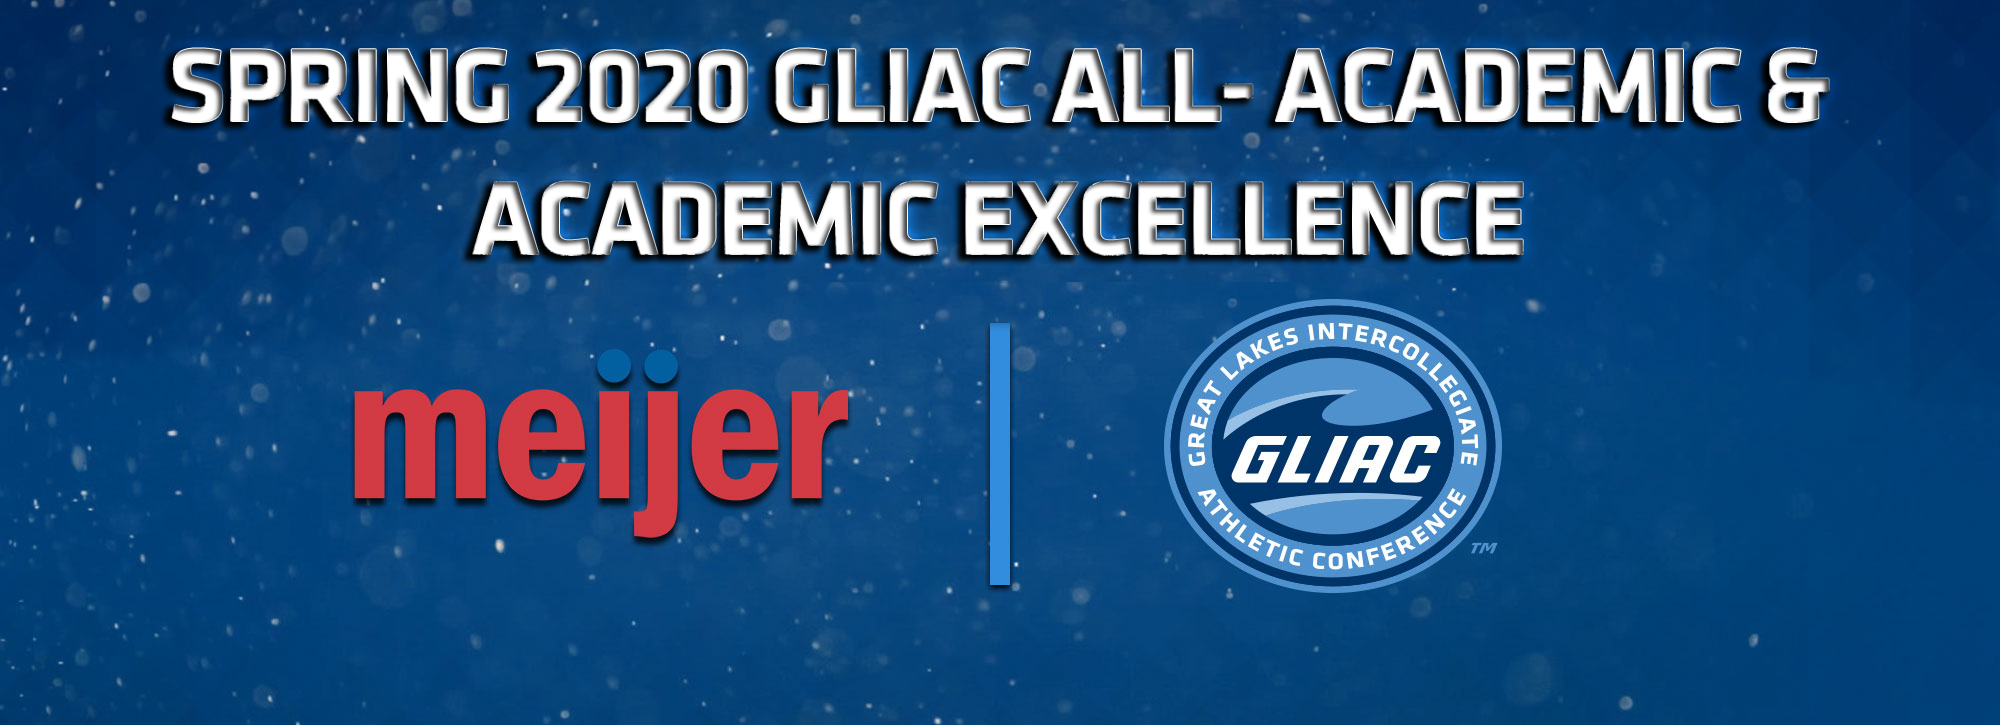 GLIAC Announces Spring 2020 All-Academic & Academic Excellence Honorees